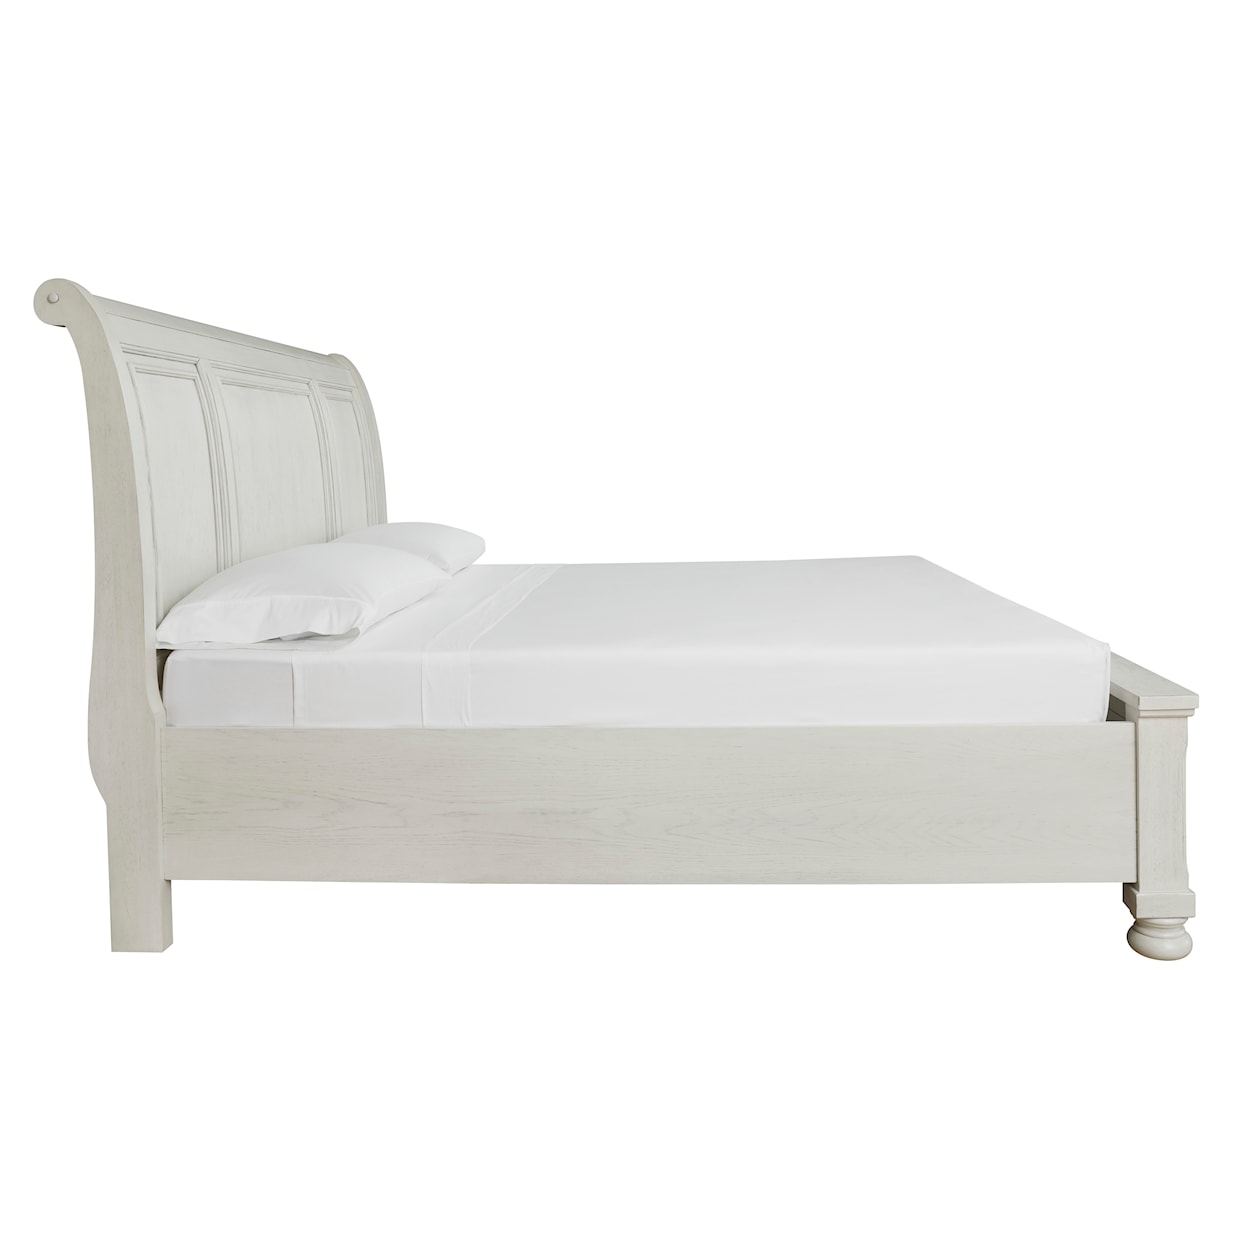 Michael Alan Select Robbinsdale King Sleigh Bed with Storage